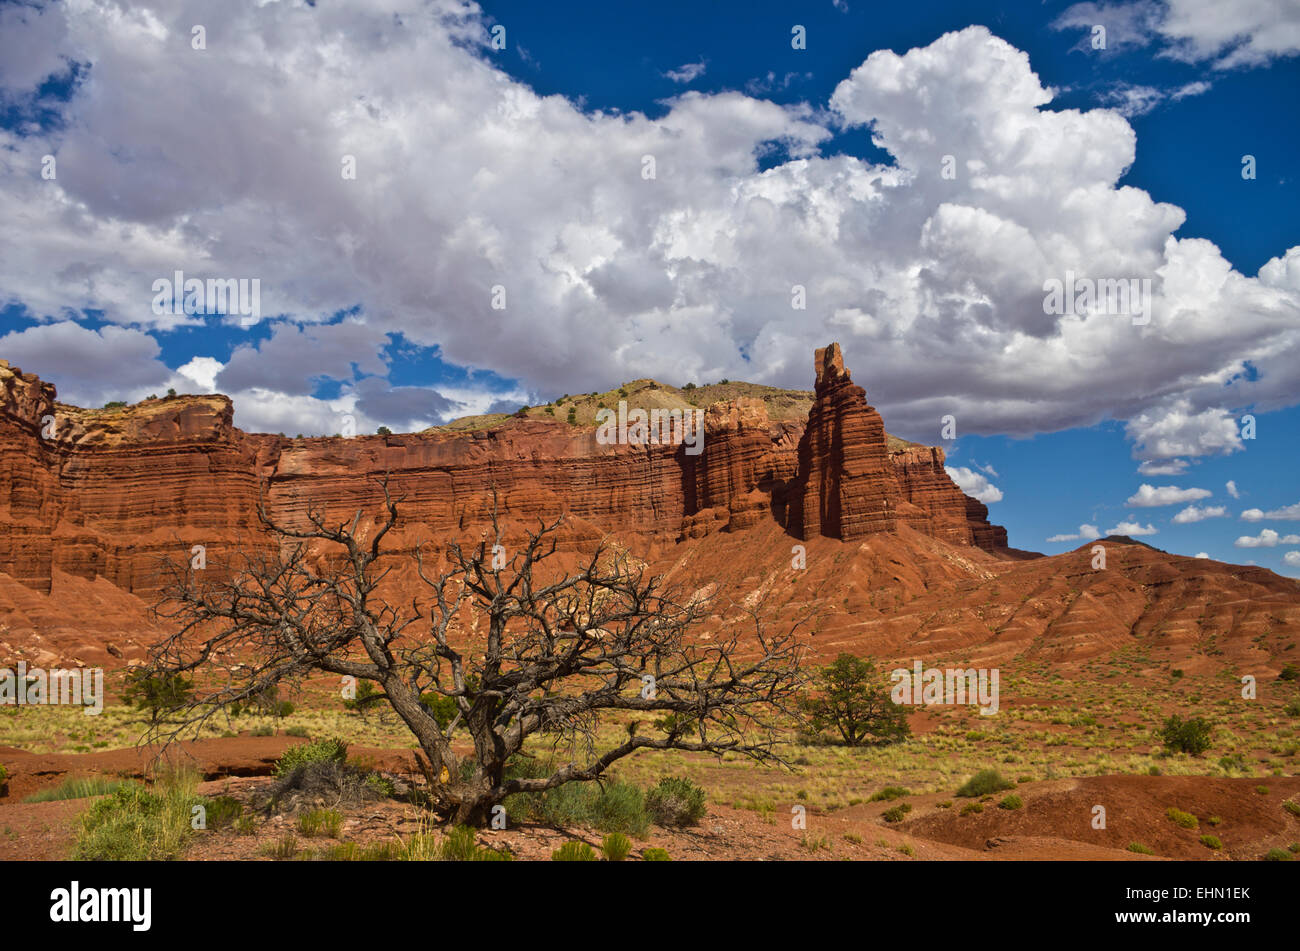 Cumulus clouds, red buttes, and a Pinyon pine near the west entrance of Capital Reef National Park, Utah, United States. Stock Photo